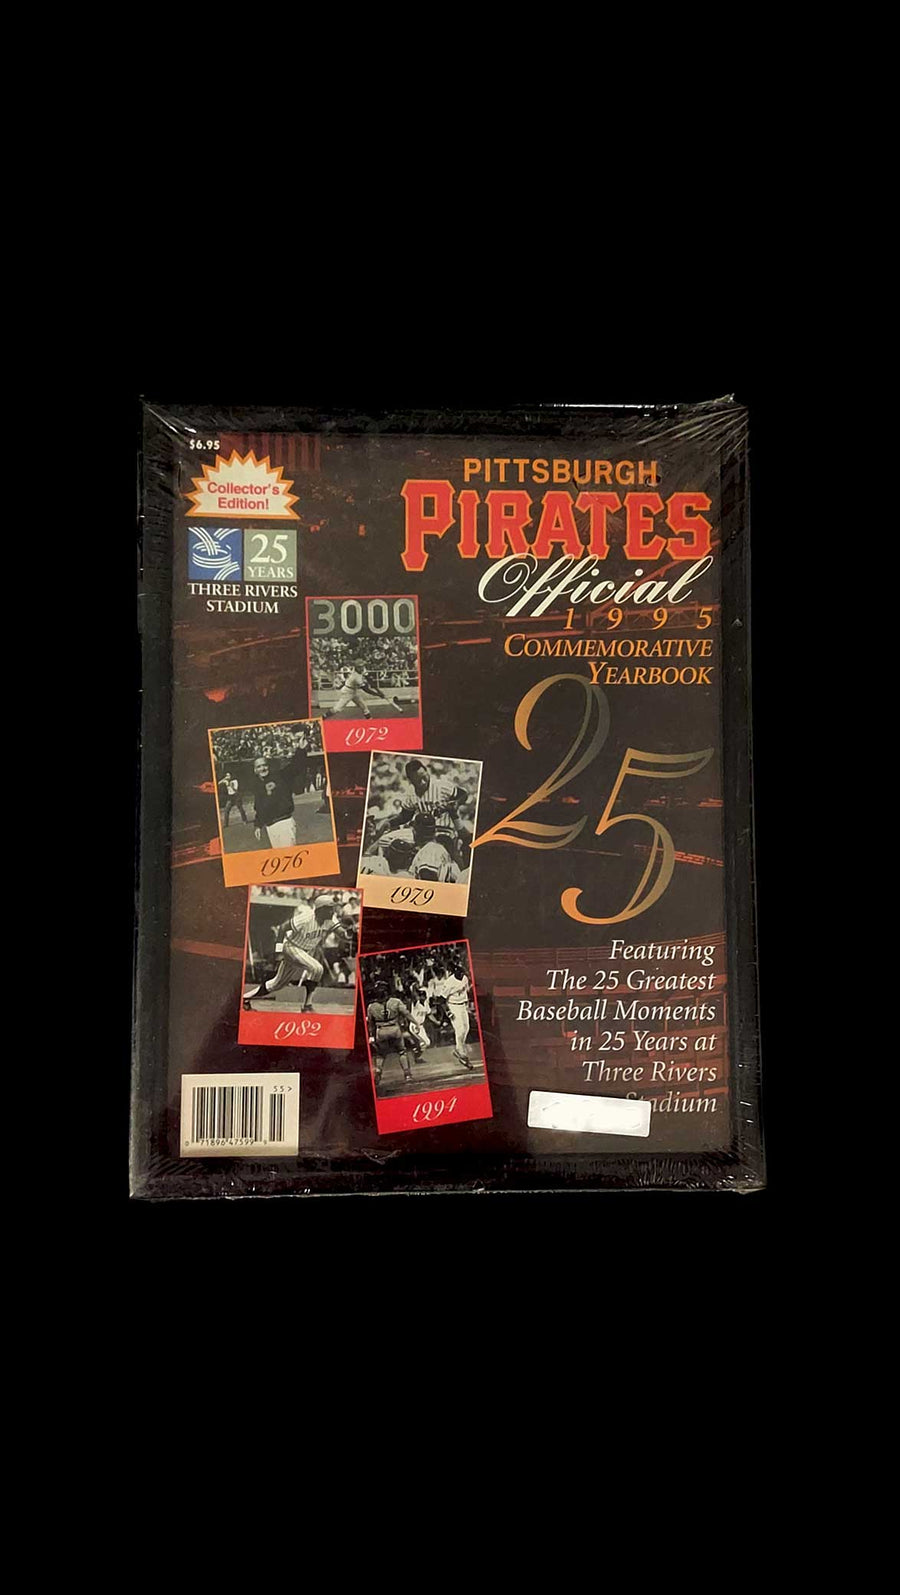 Pittsburgh-Pirates-Official-1995-Commemorative-Yearbook